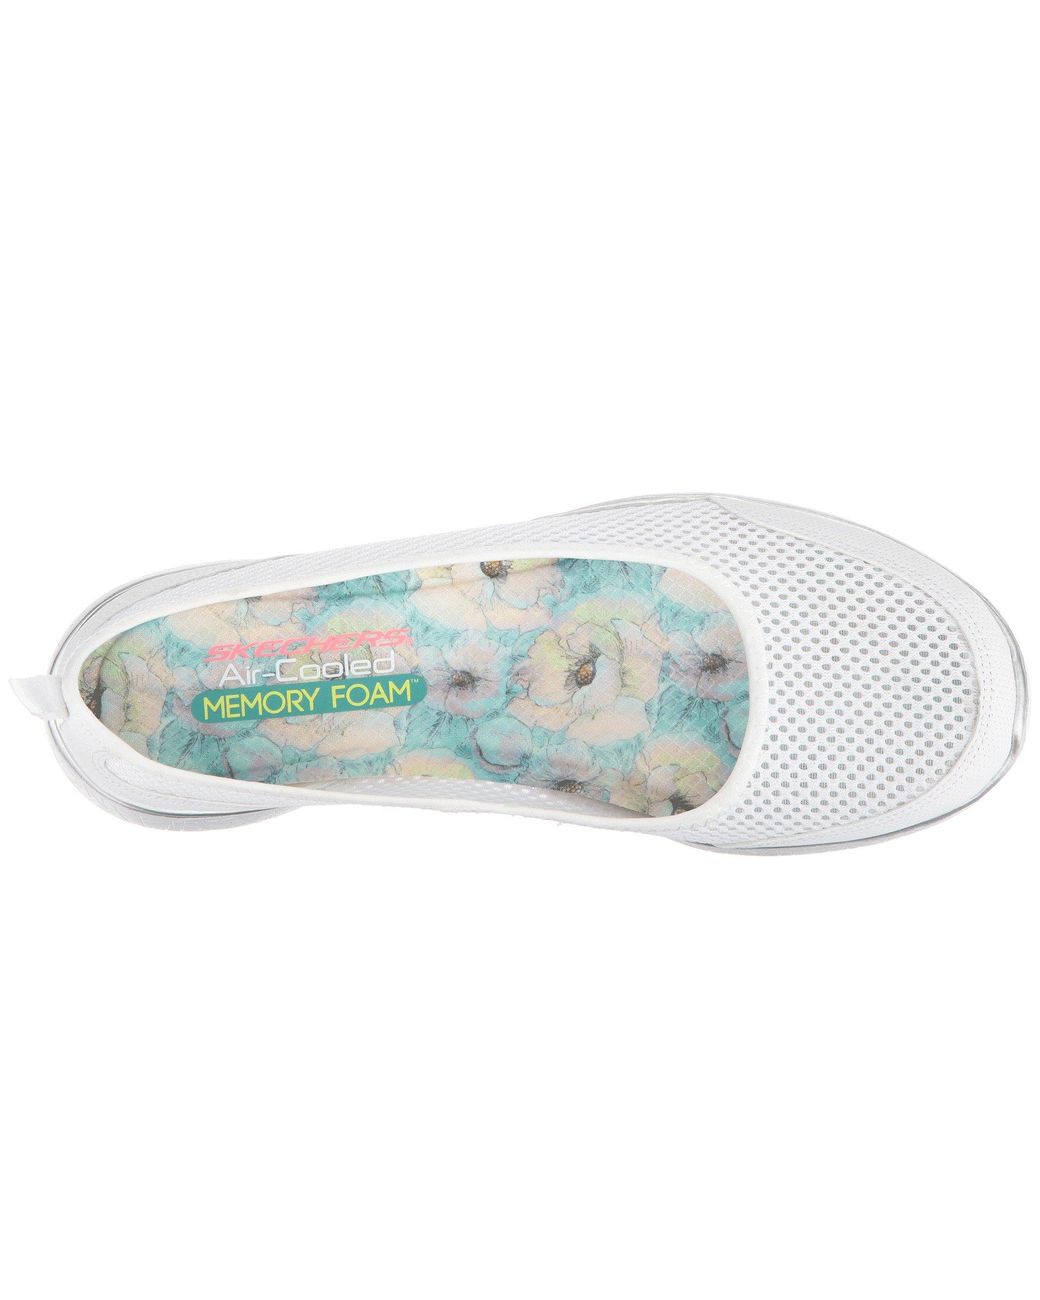 Skechers Synthetic Microburst Sudden Look in White | Lyst